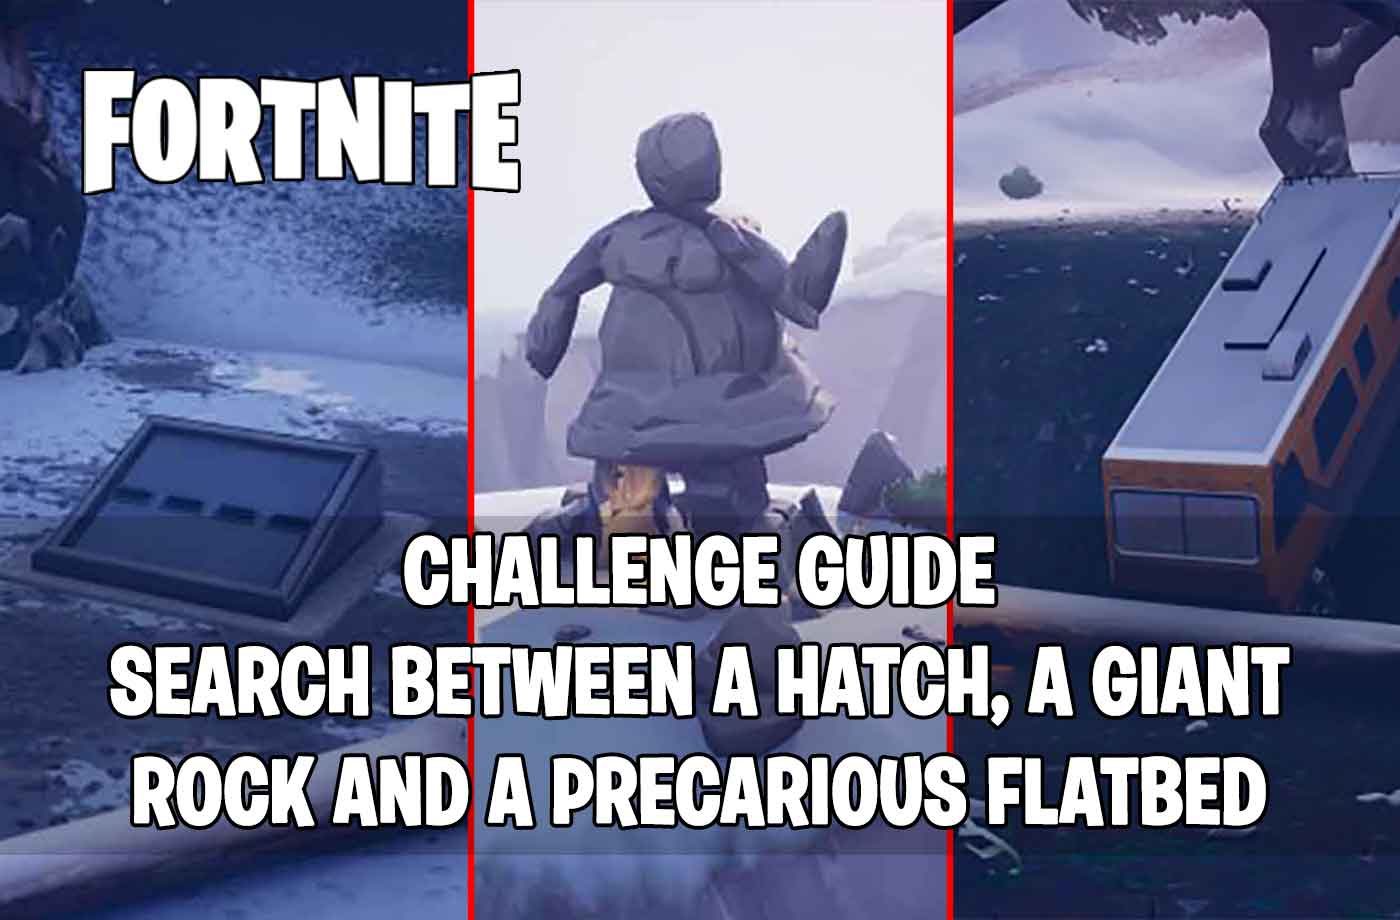 Guide Fortnite How Complete The Challenge Of Searching Between A - guide fortnite how complete the challenge of searching between a hatch a giant rock and a precarious flatbed